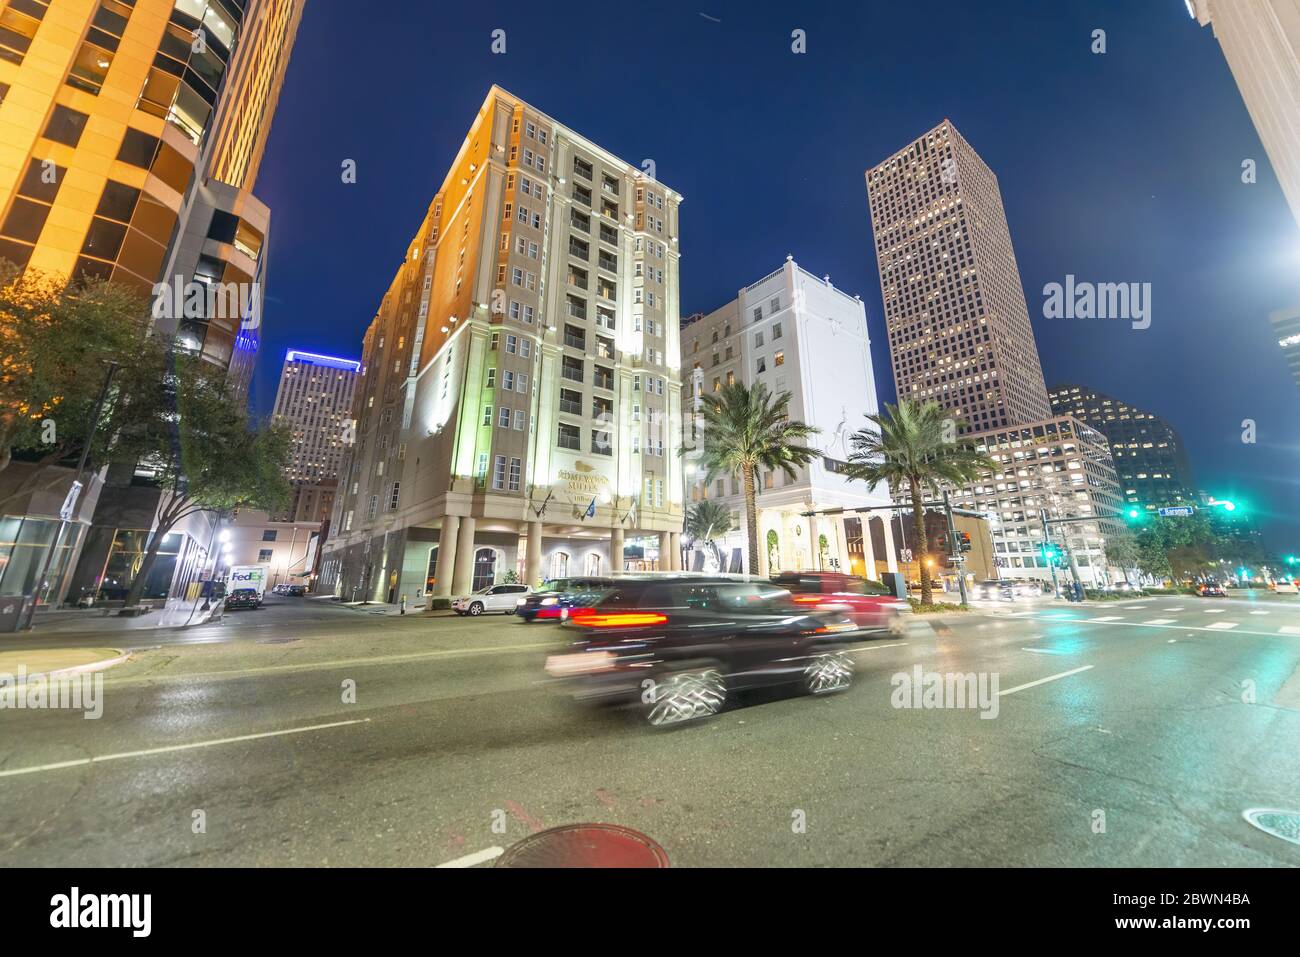 NEW ORLEANS  - FEBRUARY 2016: City streets on a beautiful clear night. Stock Photo